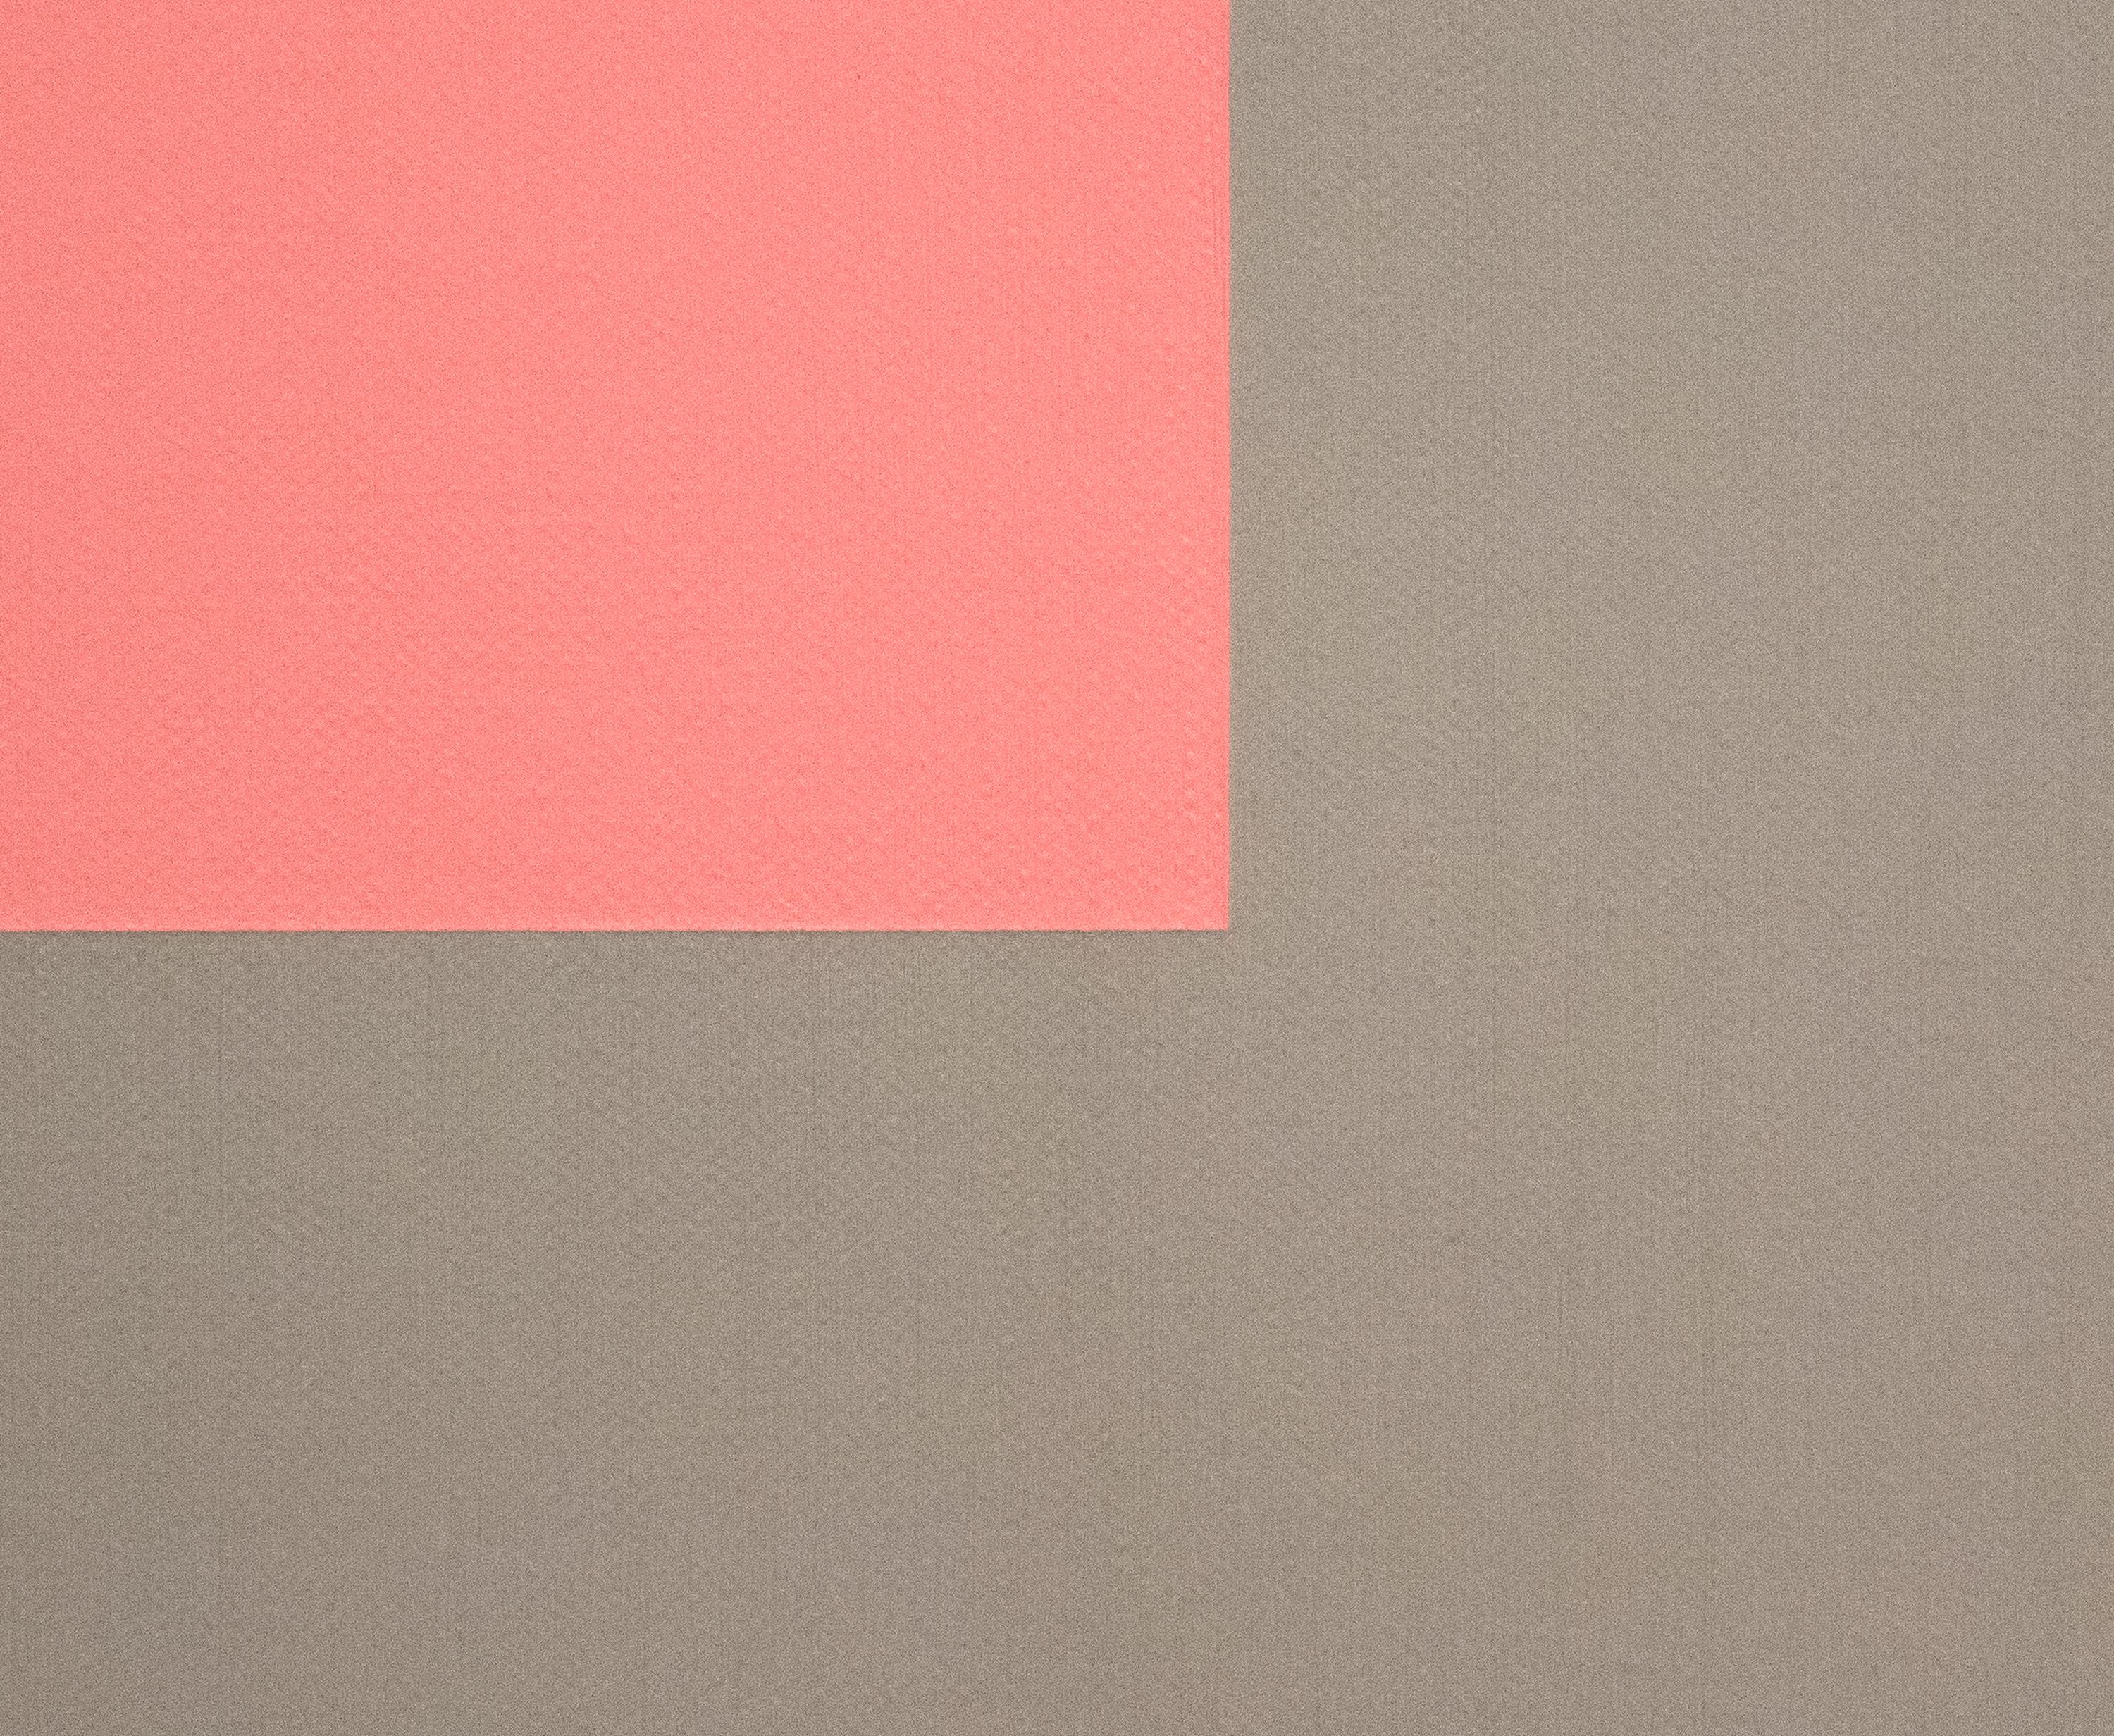 Untitled (#13) - Pink Abstract Painting by Karl Benjamin